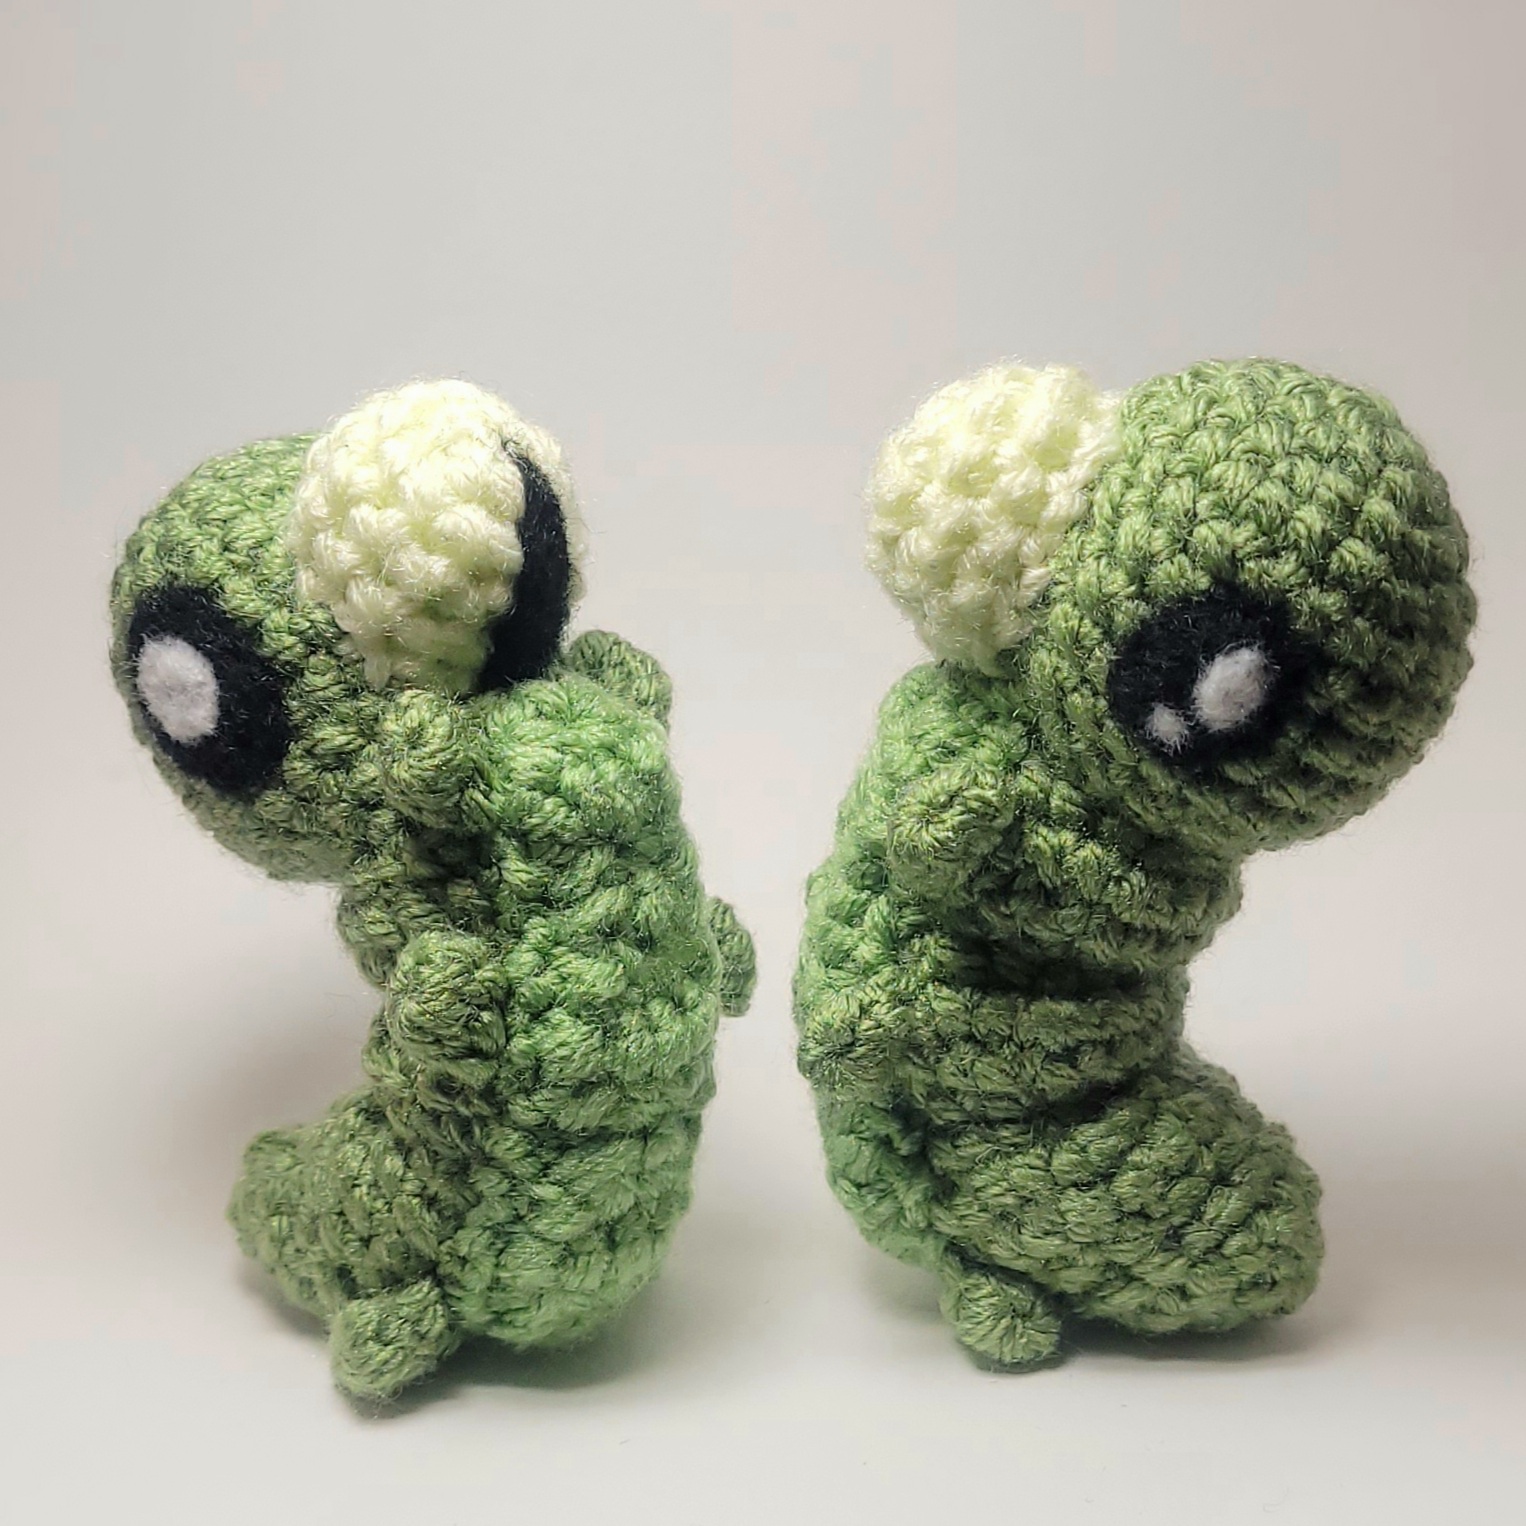 how to make felt eyes for amigurumi Archives - A Crafty Concept